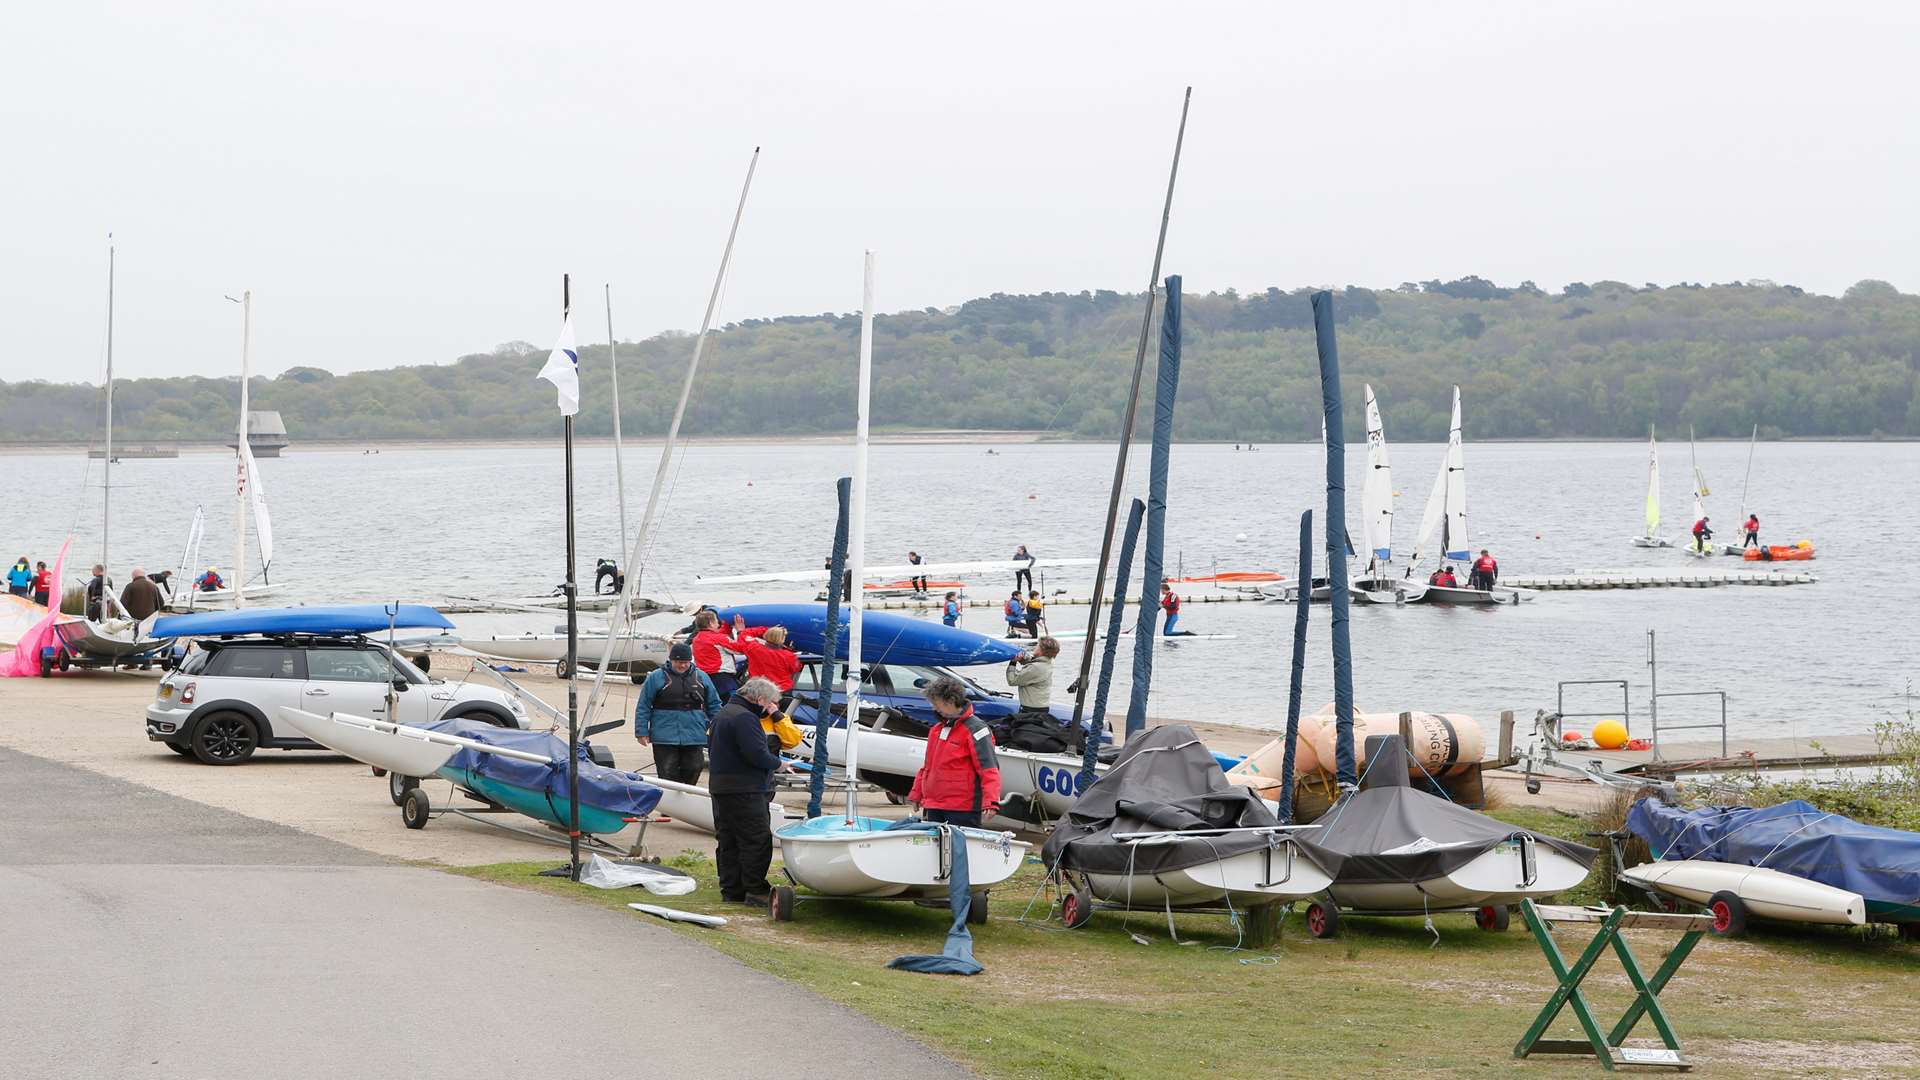 Bewl Valley Sailing Club fell into administration earlier this year